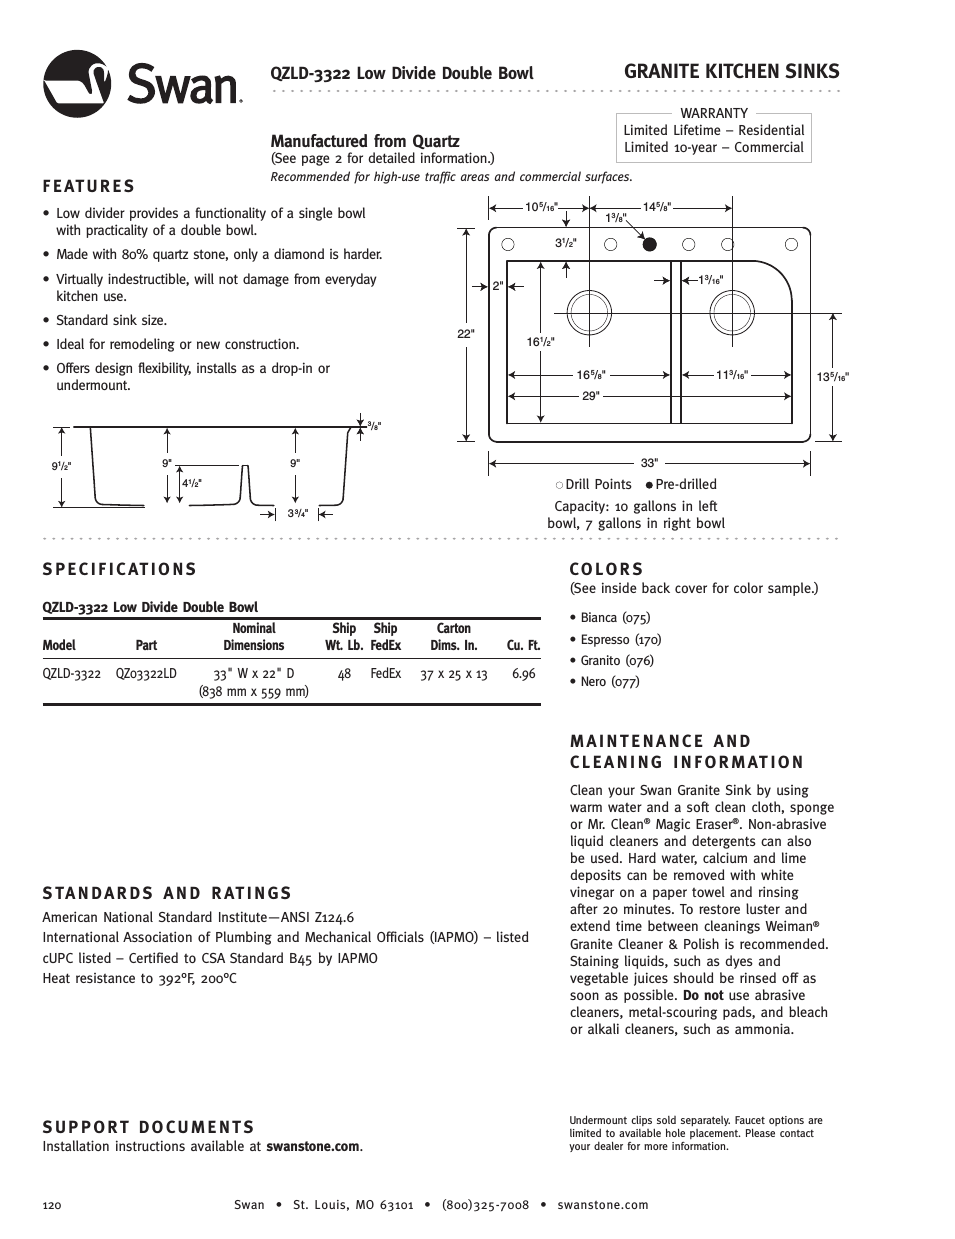 QZLD-3322 - Specification